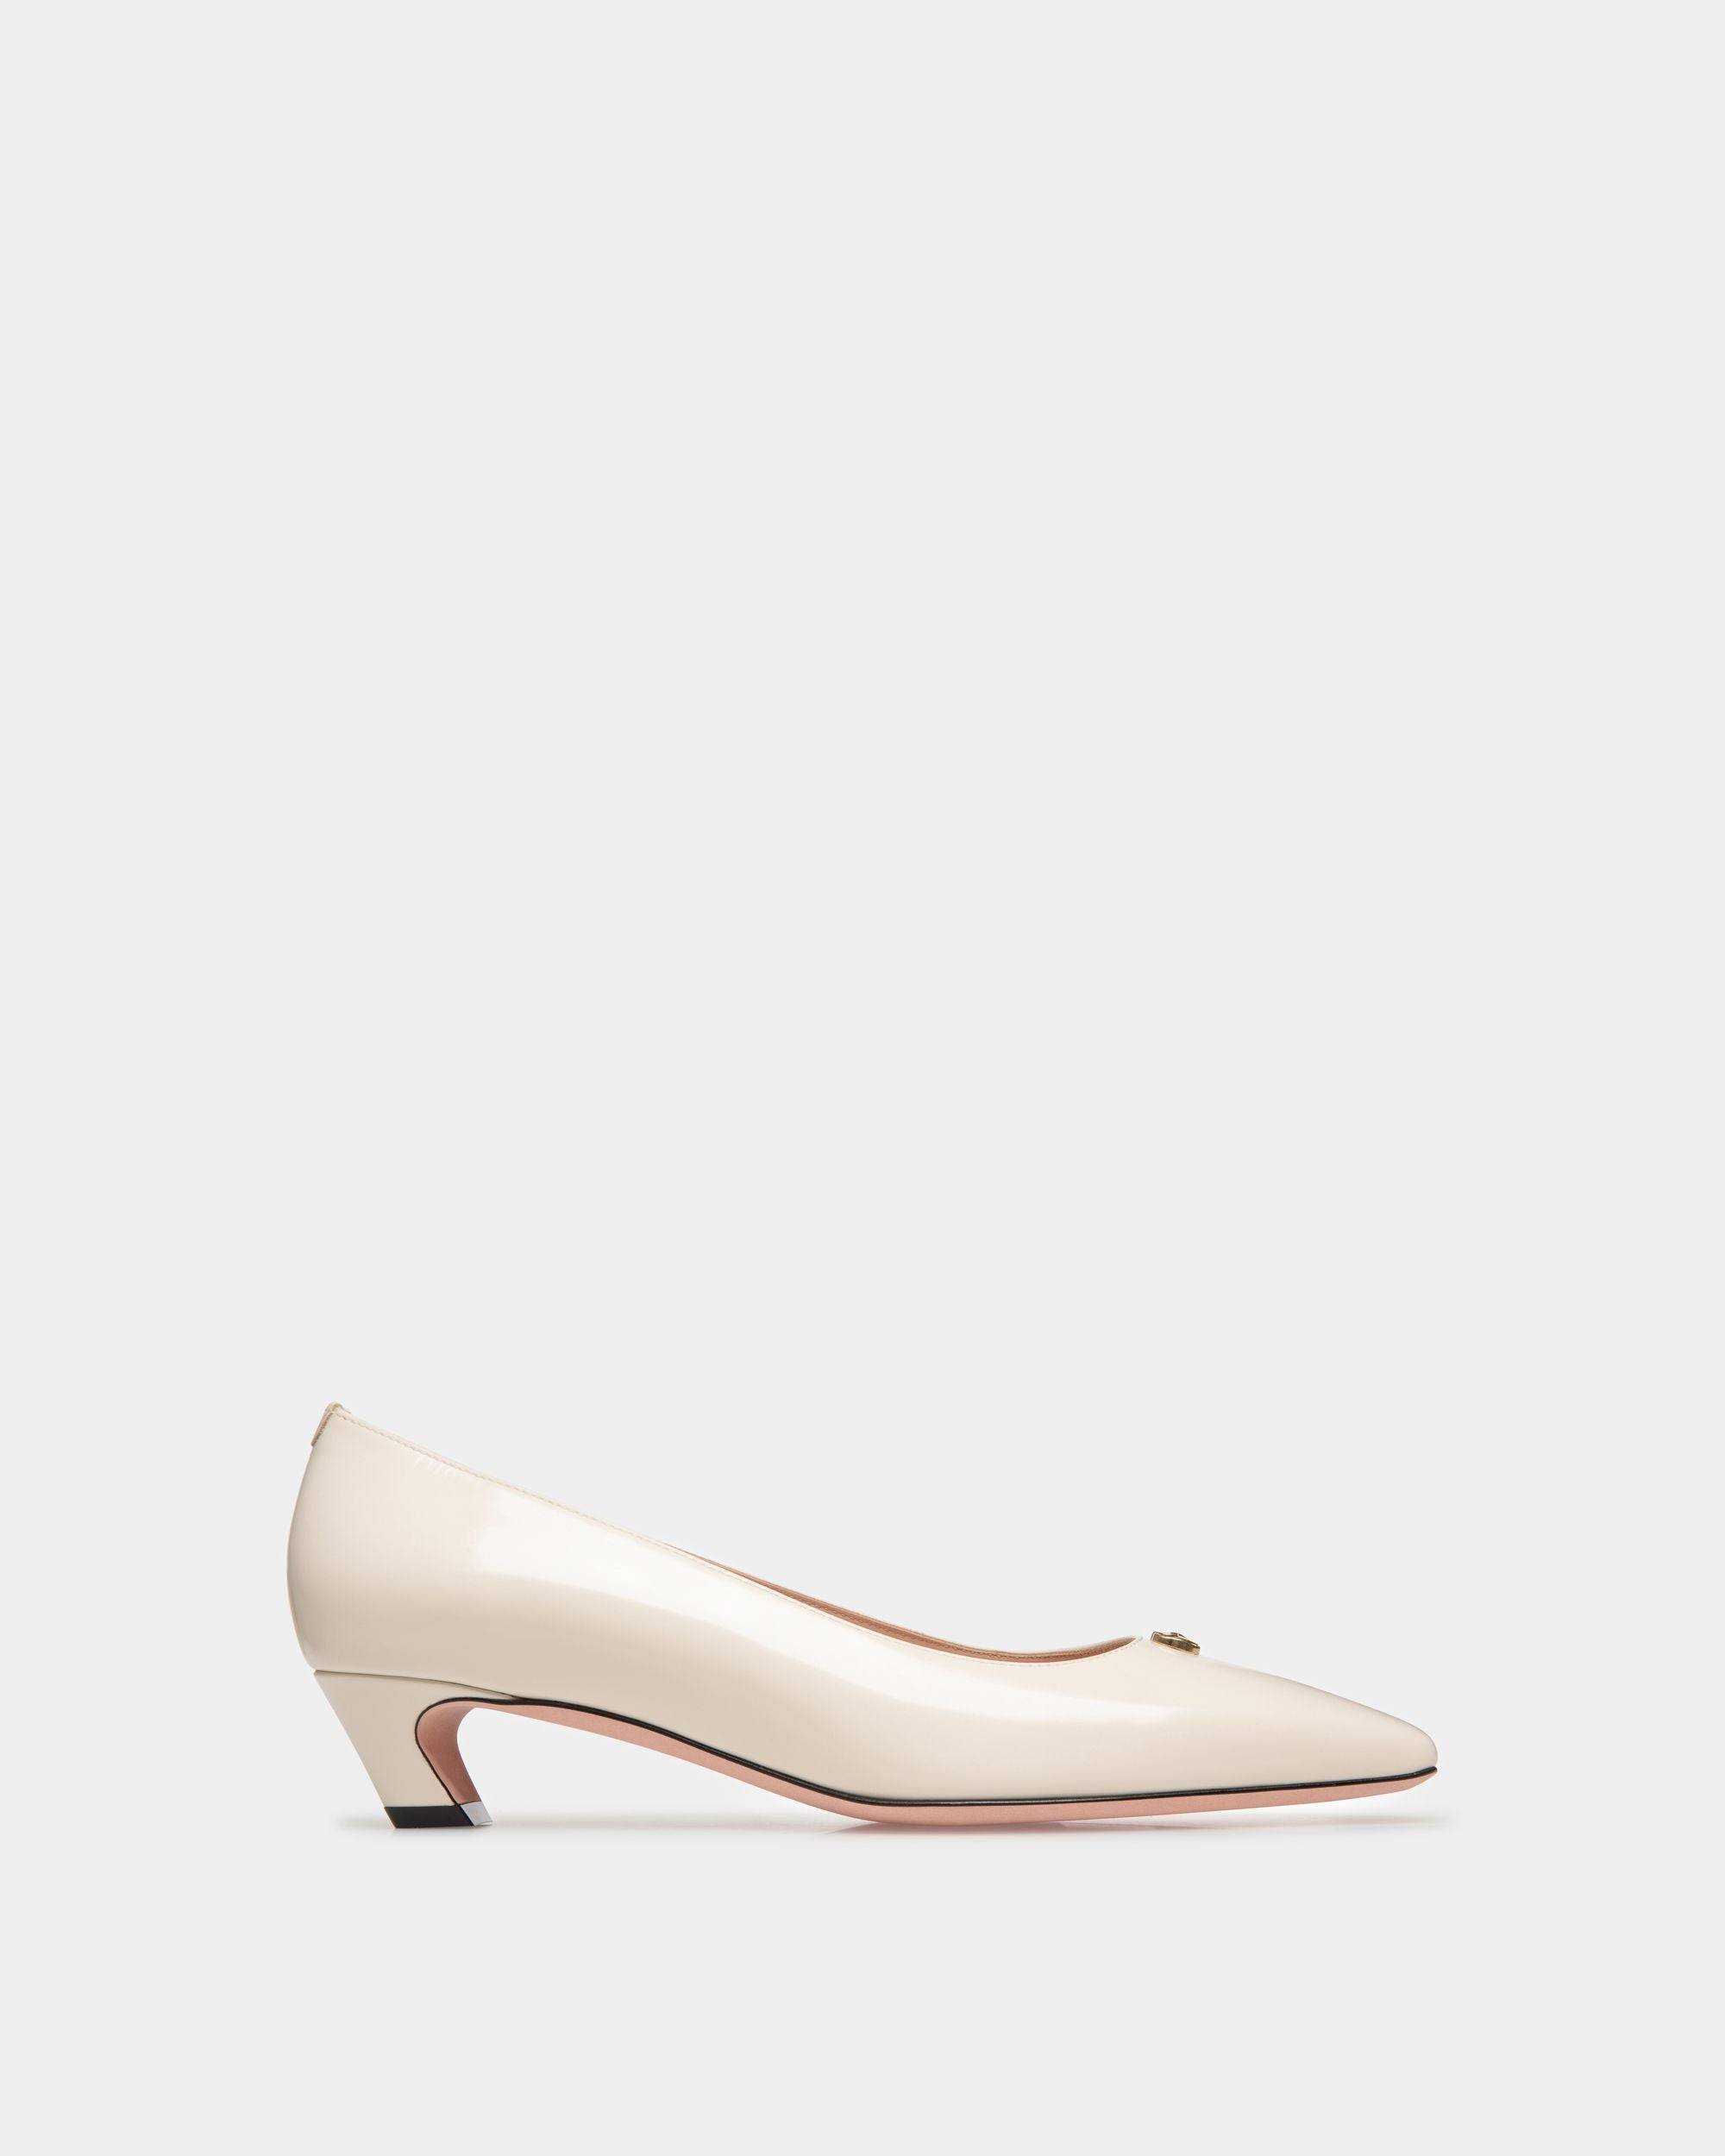 Women's Sylt Pump In White Leather | Bally | Still Life Side